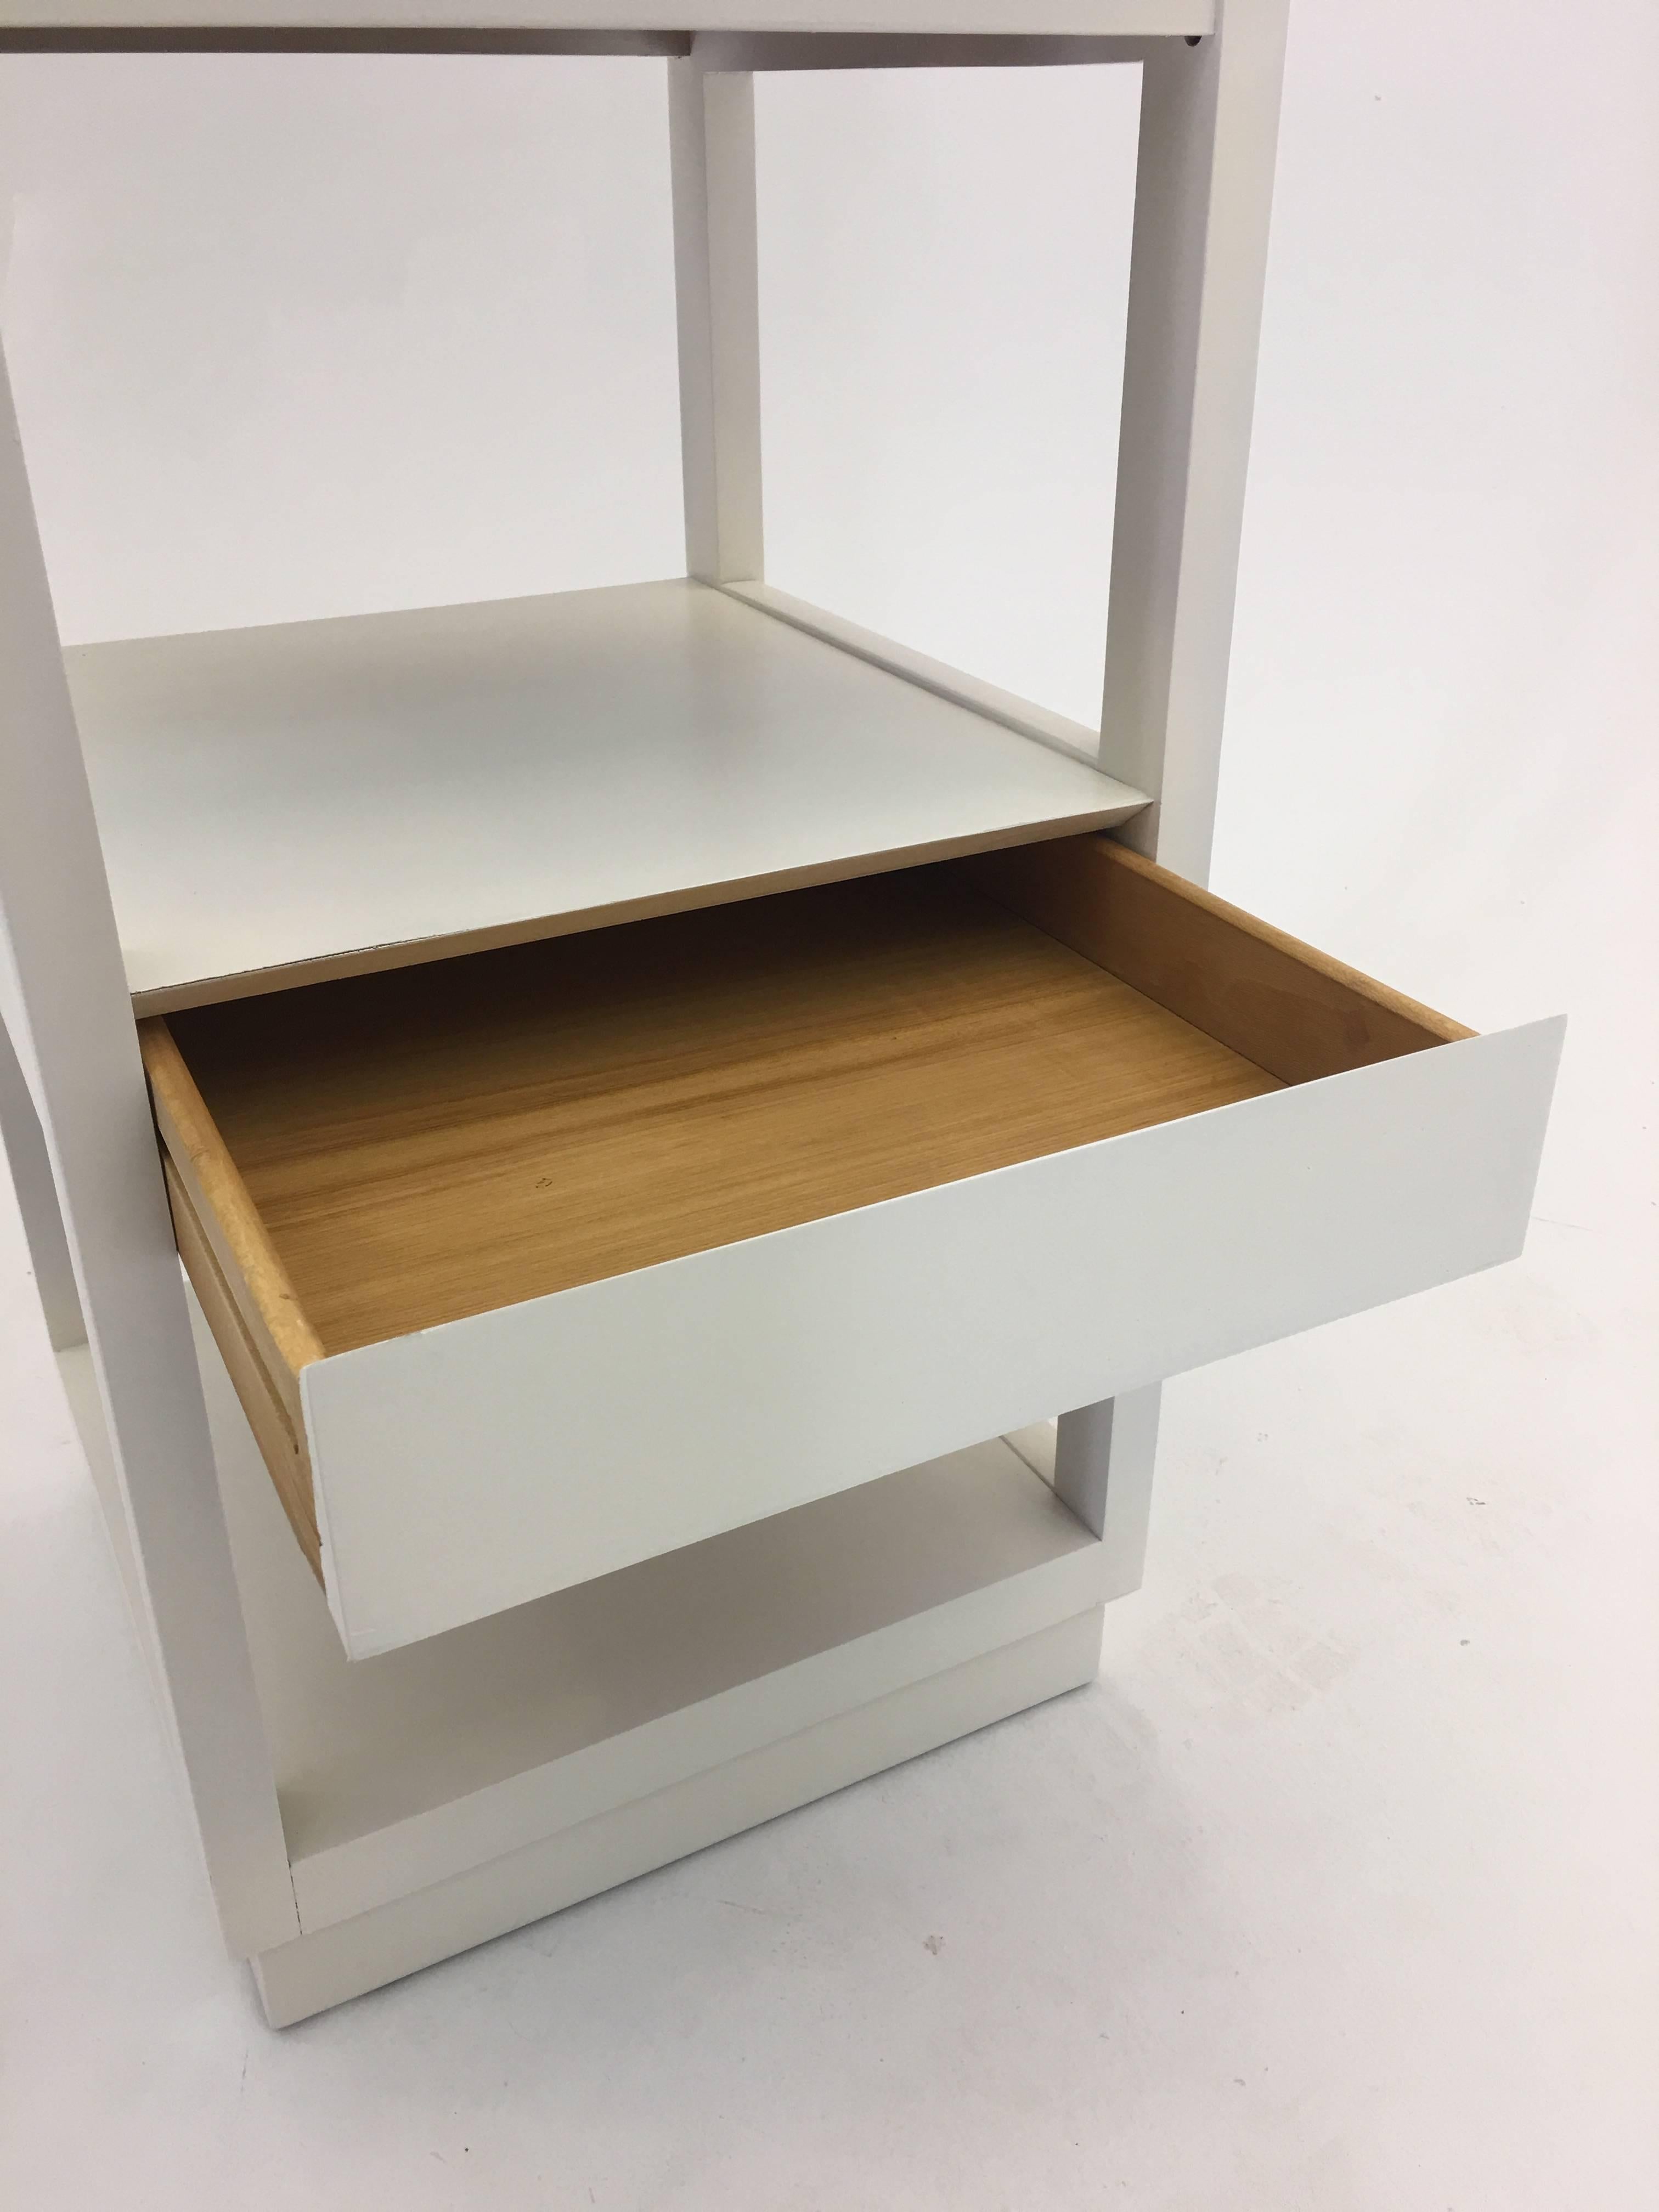 American Multipurpose Stand by Edward Wormley with Concealed Drawer